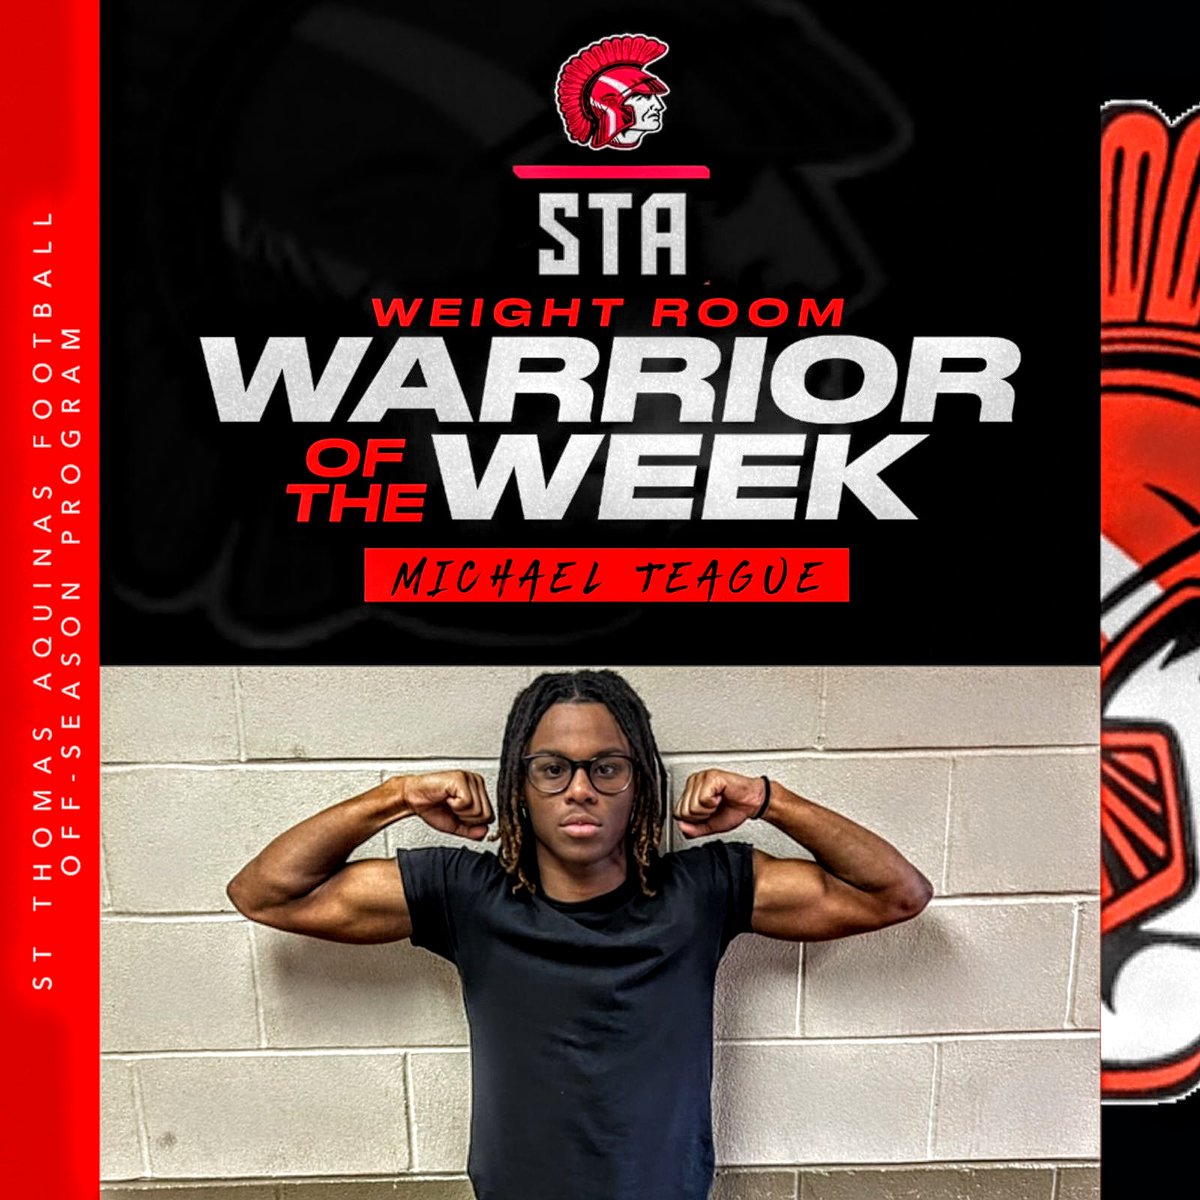 Congrats to this weeks Weight Room Warrior, Michael Teague Jr! He is a 5'11' returning CB/WR who has made tremendous strides in the off-season program. He already has gained 5lbs of muscle & is looking to have a huge SR campaign.

#BEGREAT #RecruitSTA #OFFSEASONWORK #weightroom